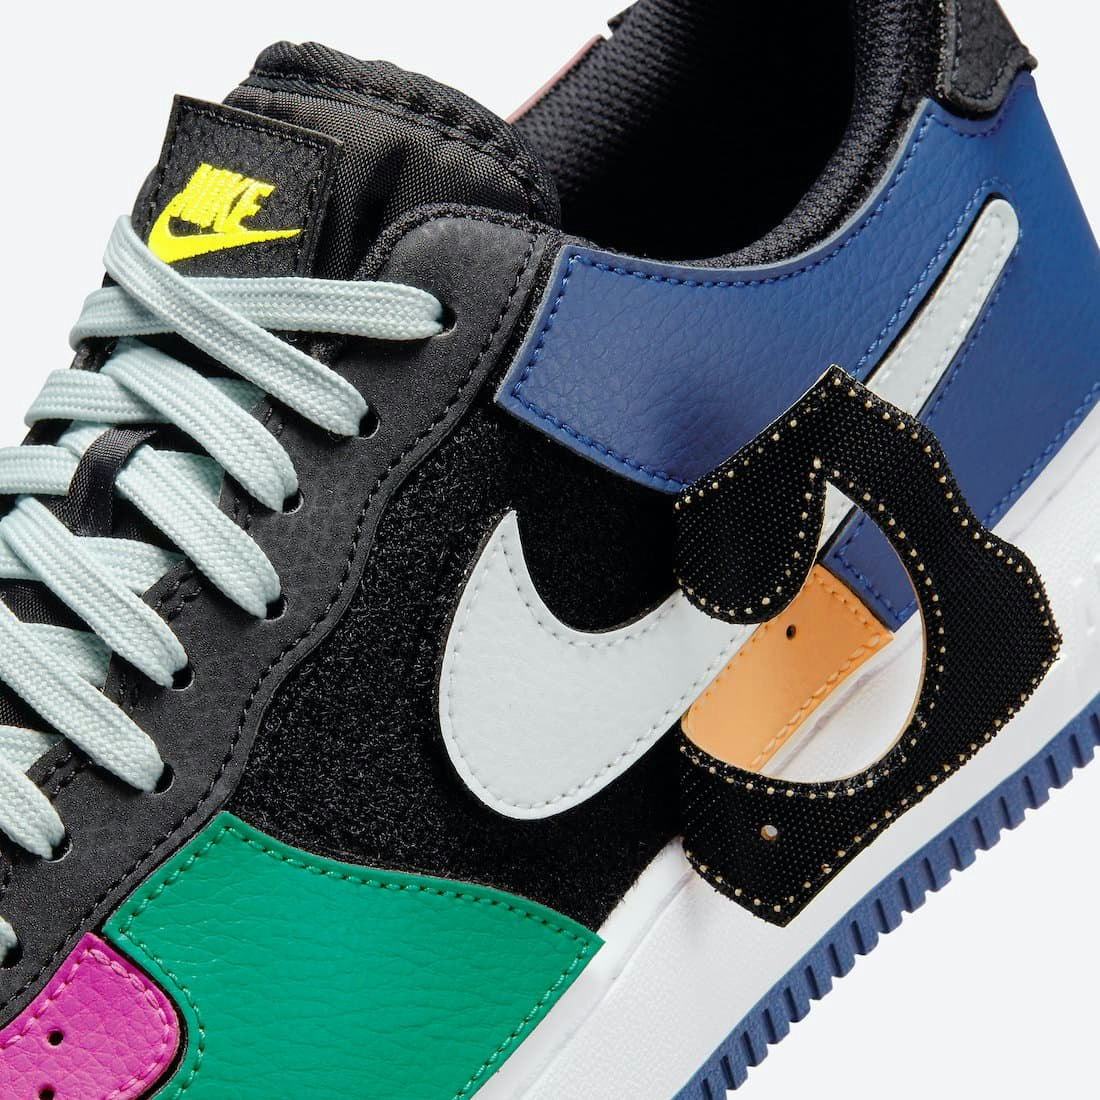 Nike Air Force 1/1 Low "Multicolor"